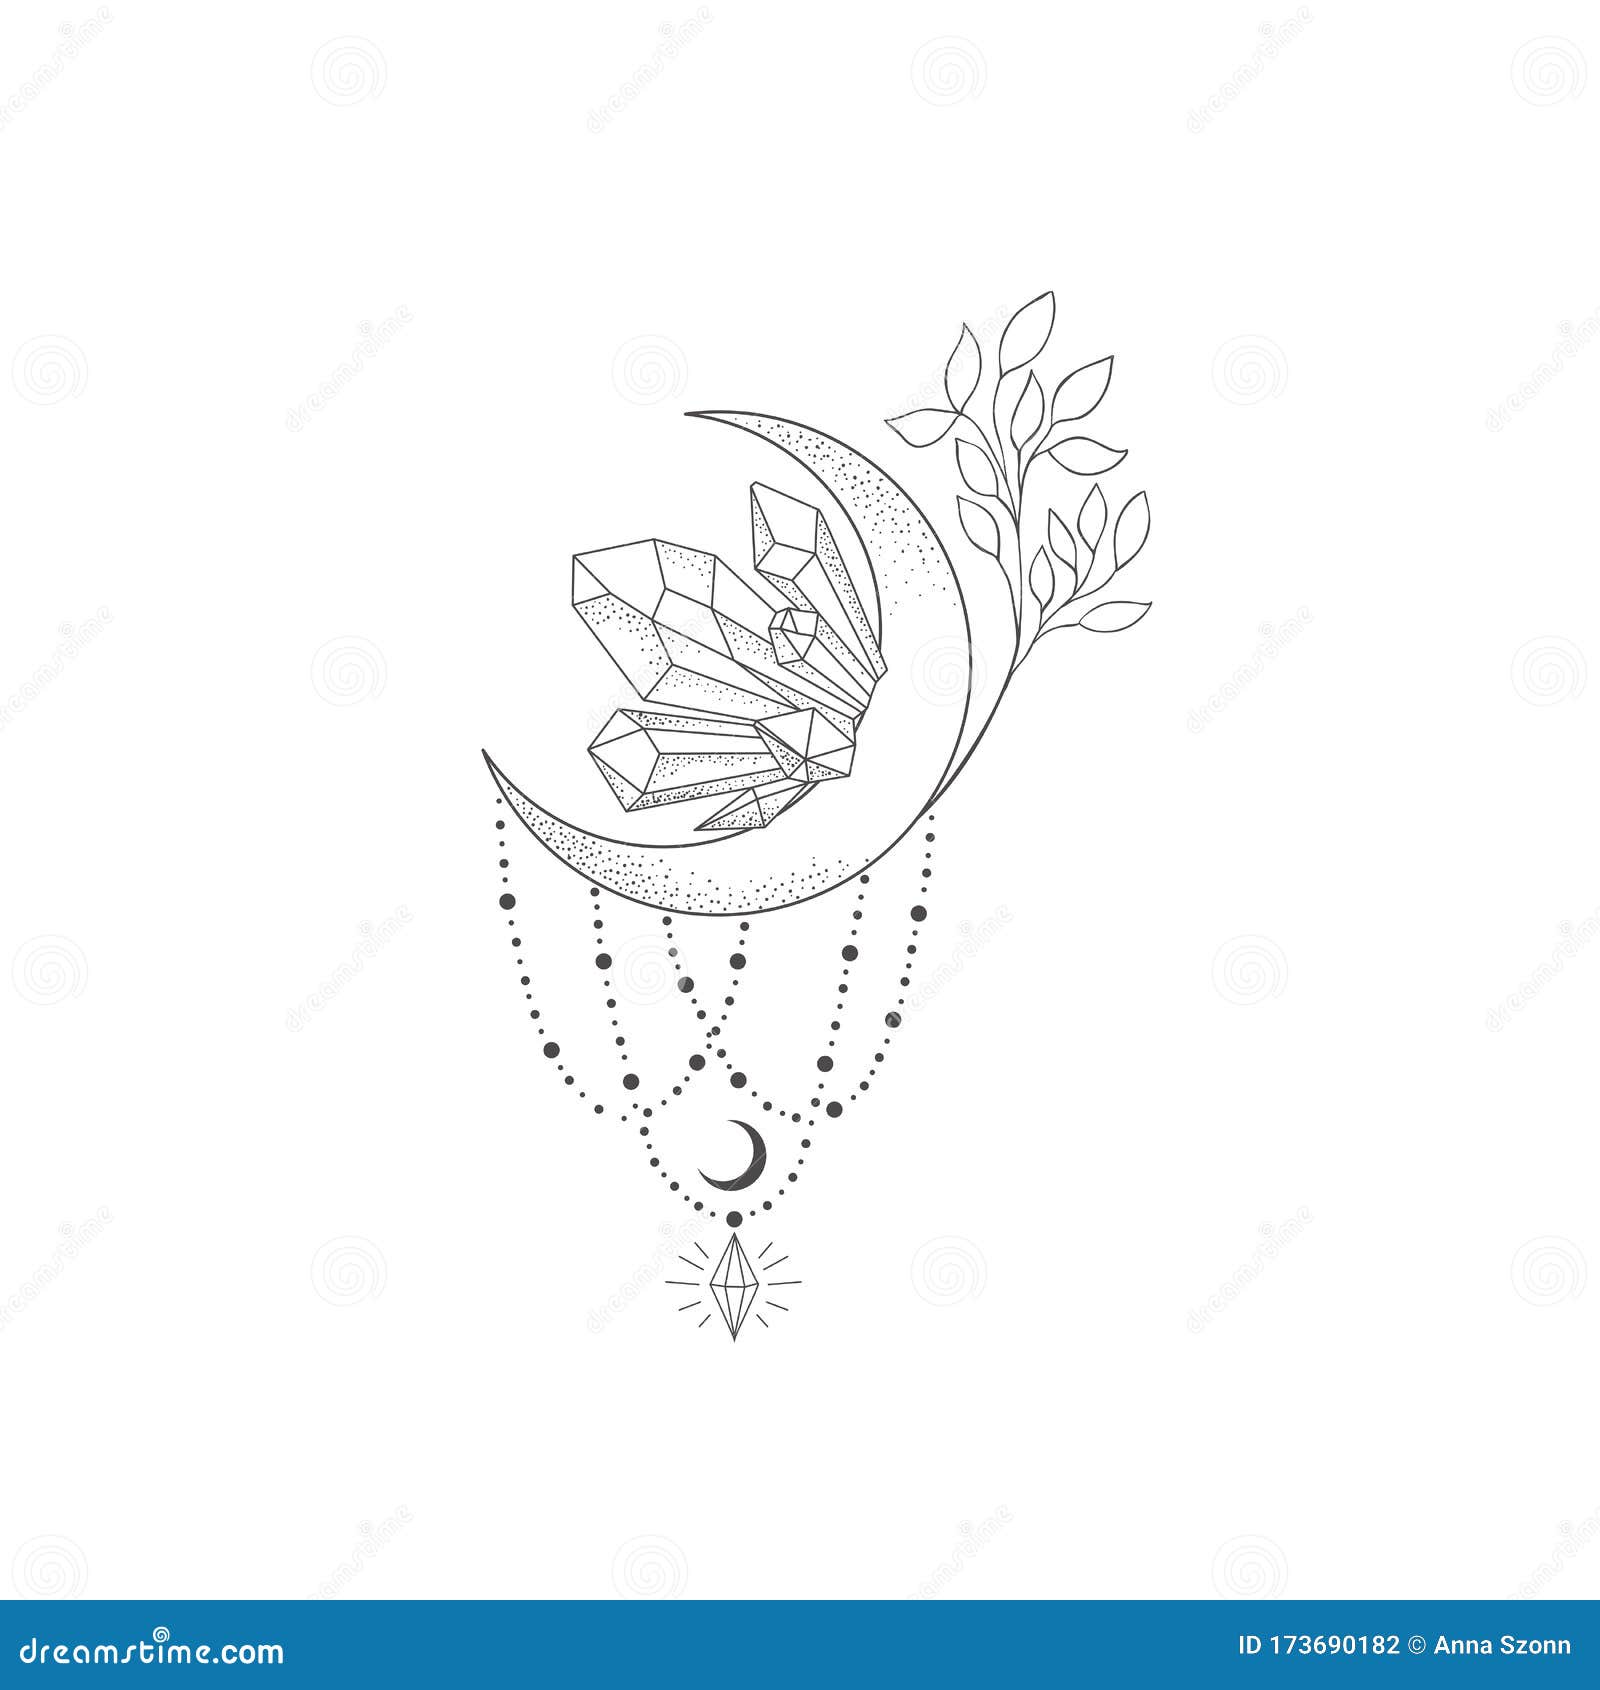 Decorative Mystery Floral Design with Moon and Crystal. Tattoo or T-shirt  Print Stock Vector - Illustration of leaf, alchemy: 173690182